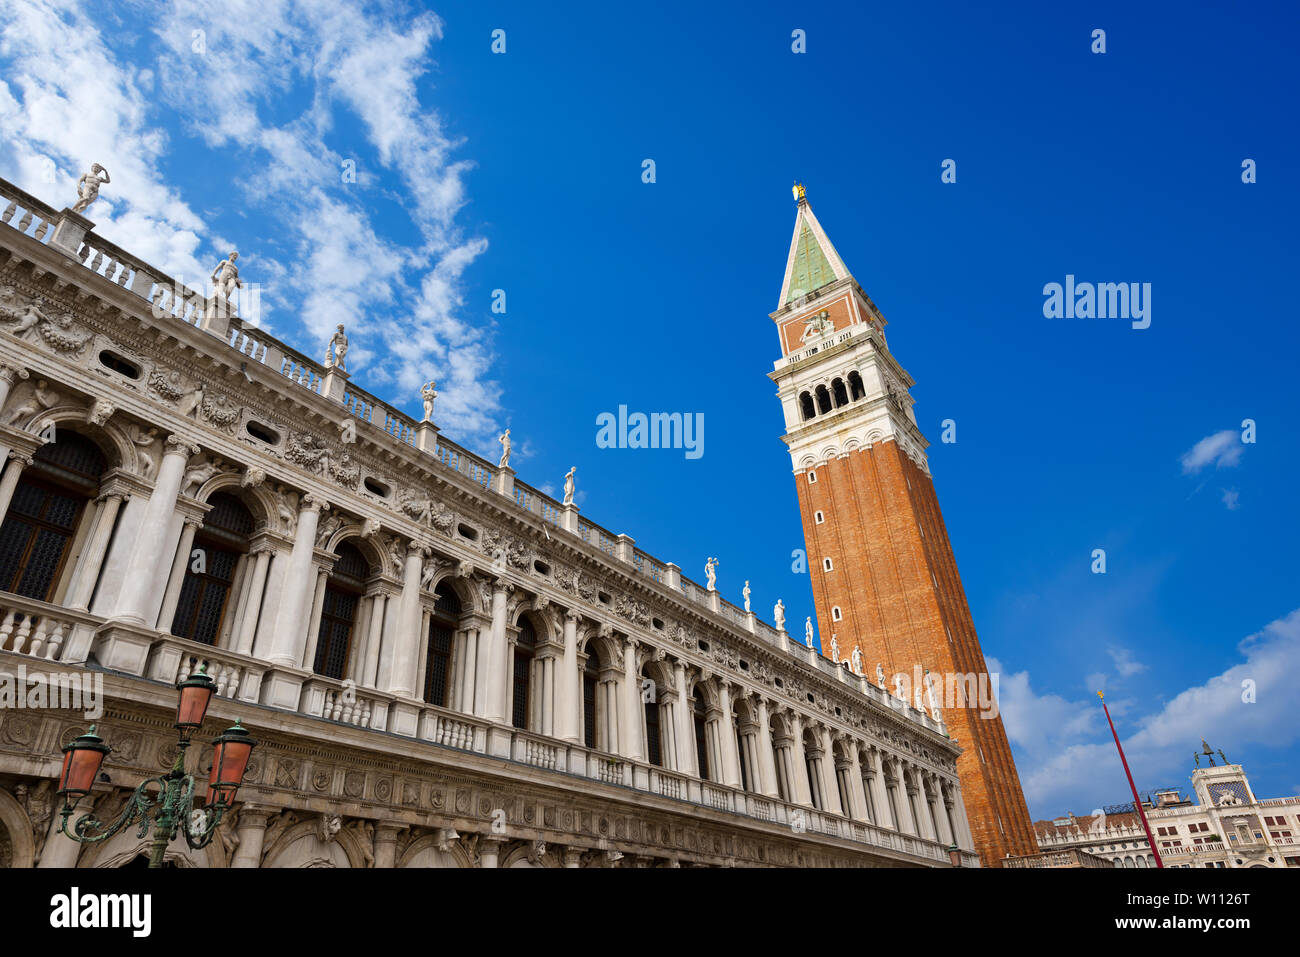 The palace of National Library Marciana and bell tower of St. Mark in Piazza San Marco (St. Mark Square) in the city of Venezia, Venice, Italy Stock Photo